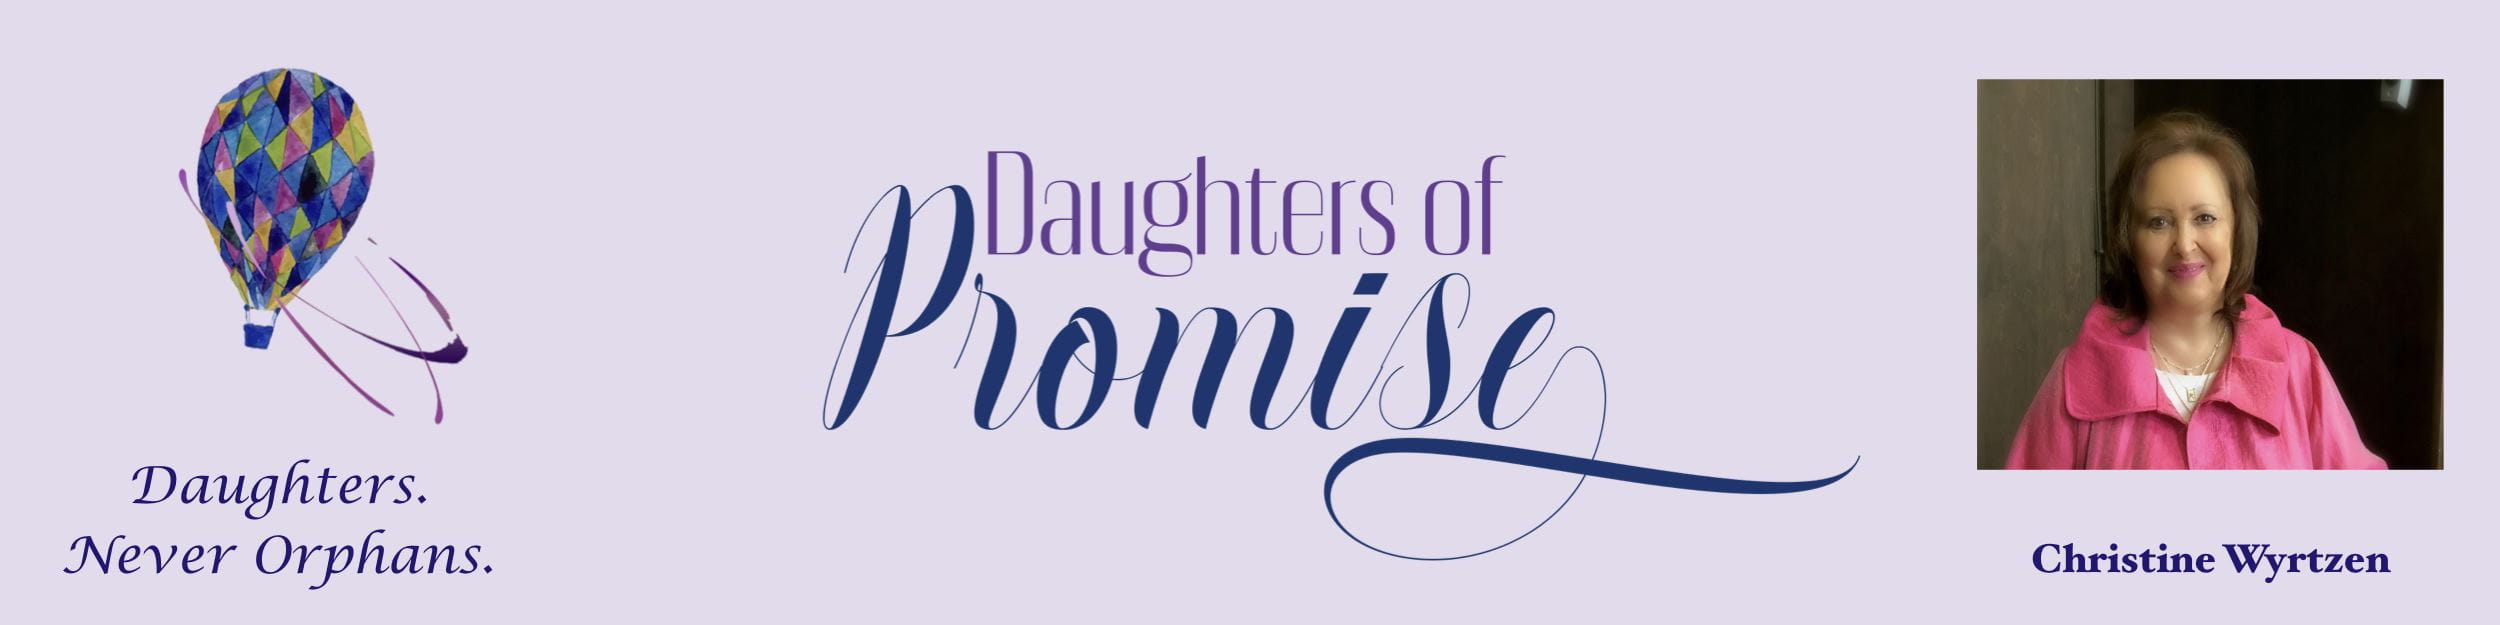 Brides and Grooms Who Never Left Home – Daughters of Promise – October 23